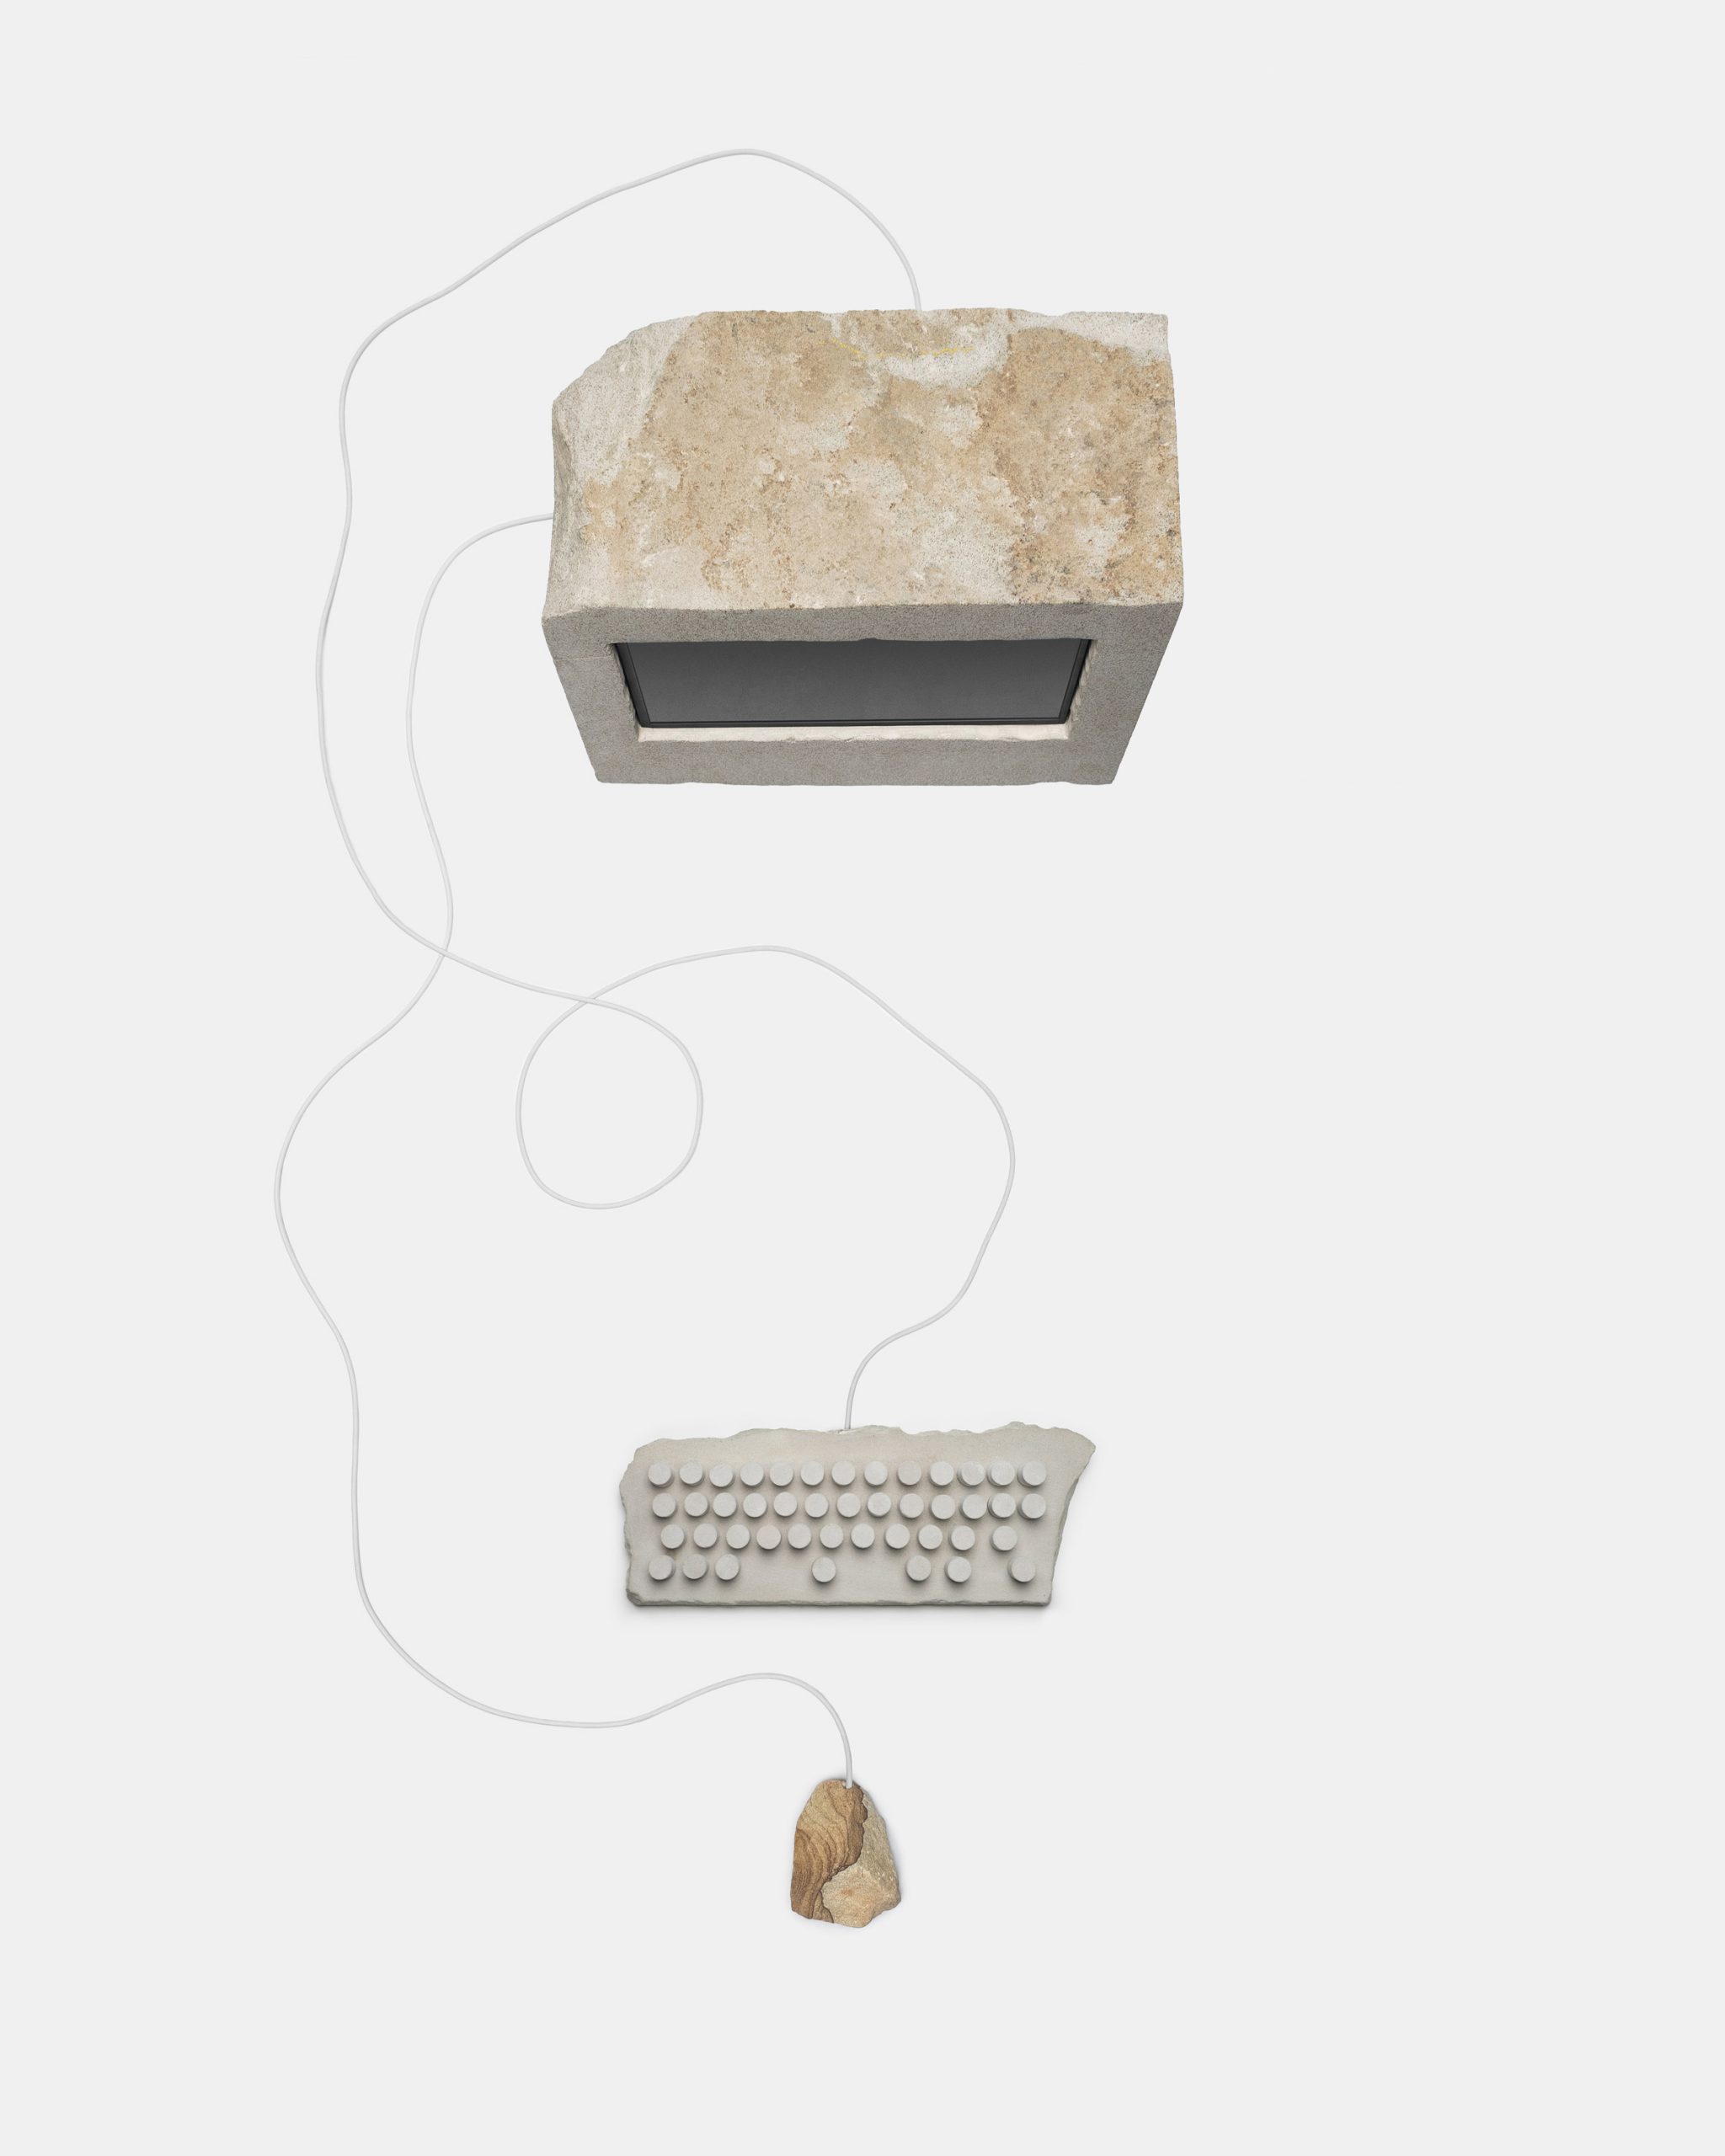 Limetone computer, keyboard and mouse